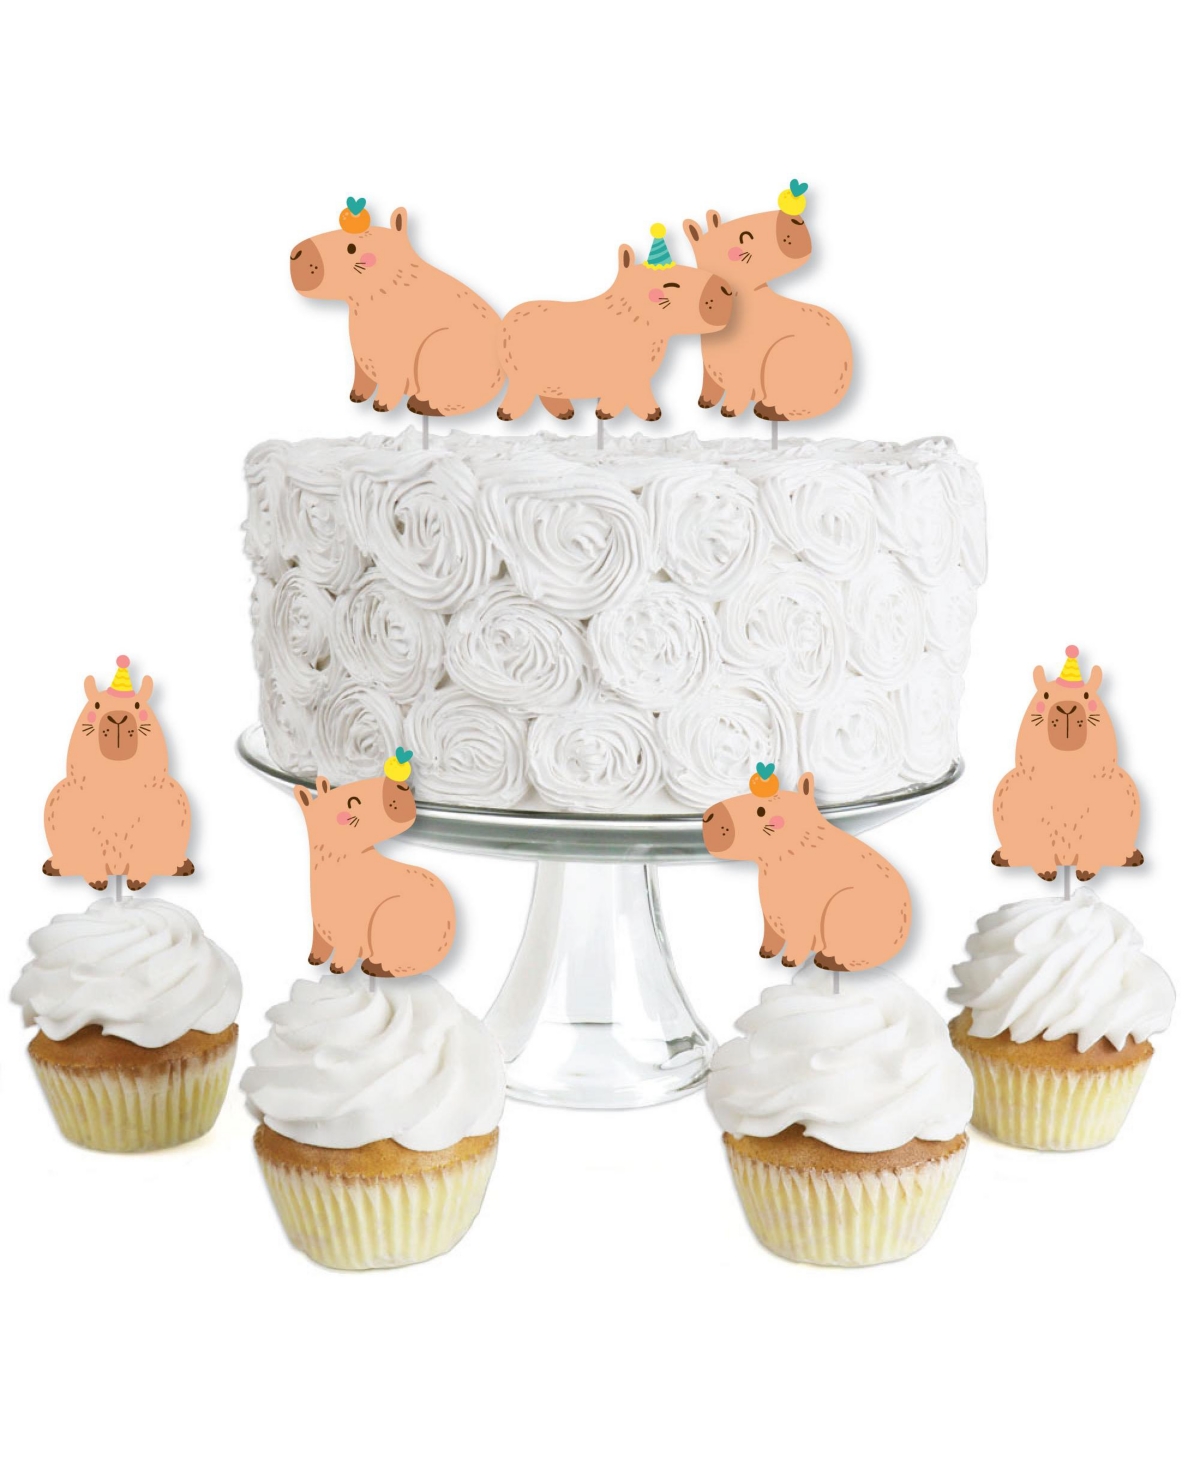 Capy Birthday - Dessert Cupcake Toppers - Capybara Party Clear Treat Picks 24 Ct - Brown